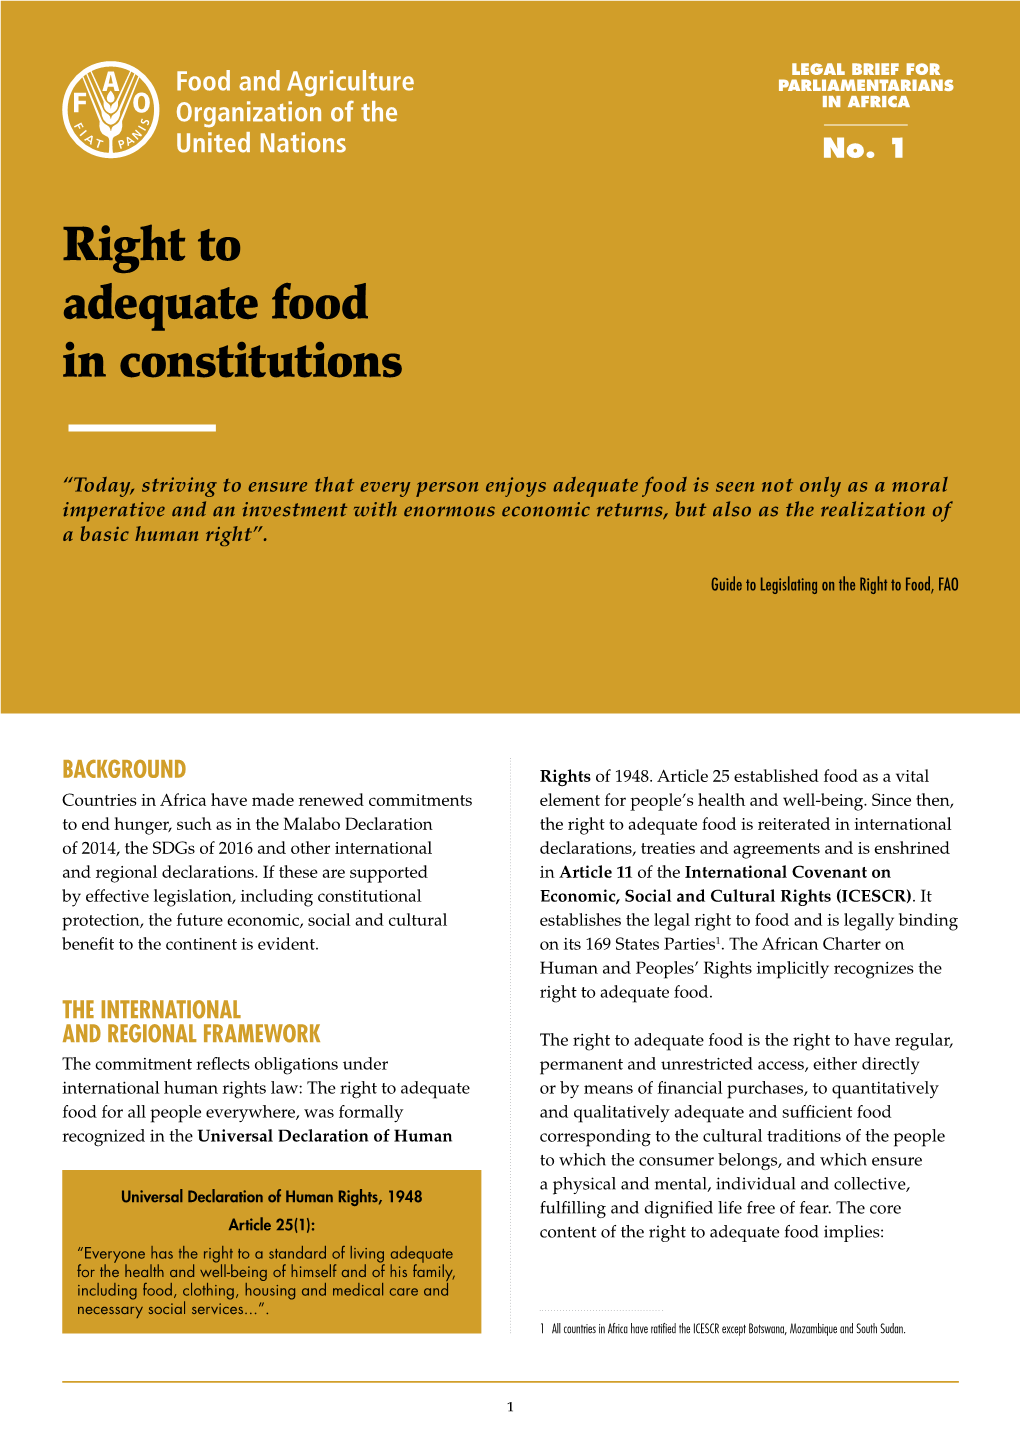 Right to Adequate Food in Constitutions